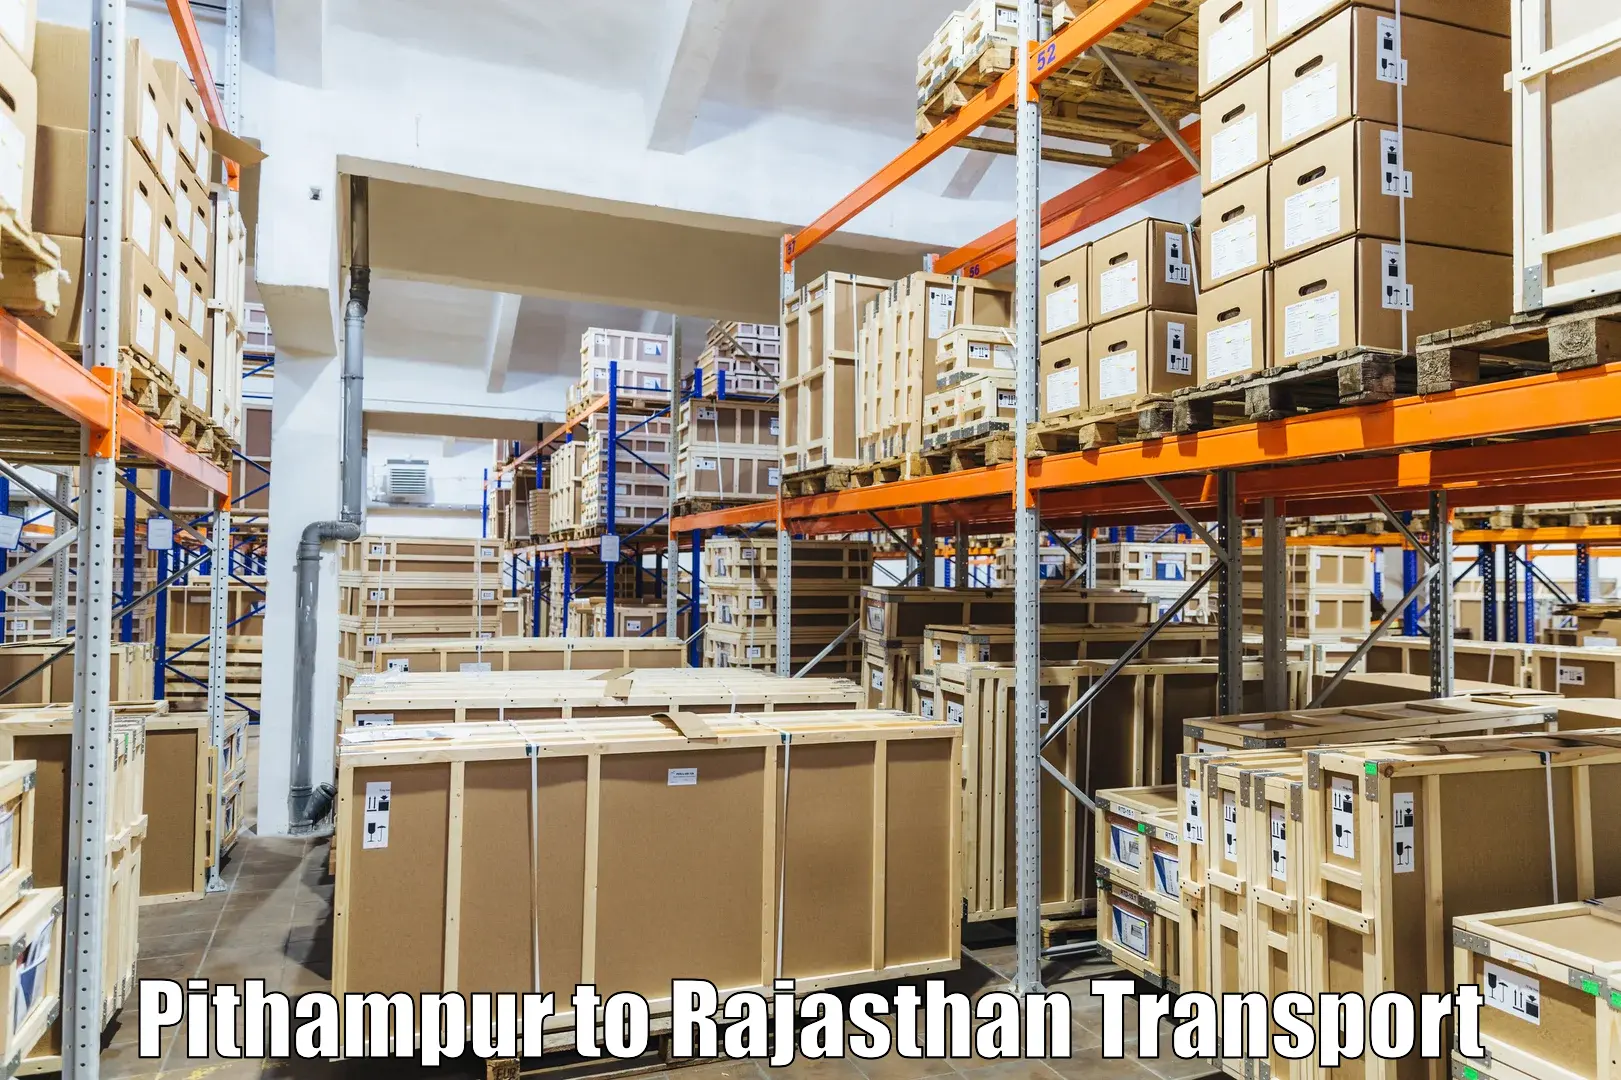 Air freight transport services Pithampur to Chaksu